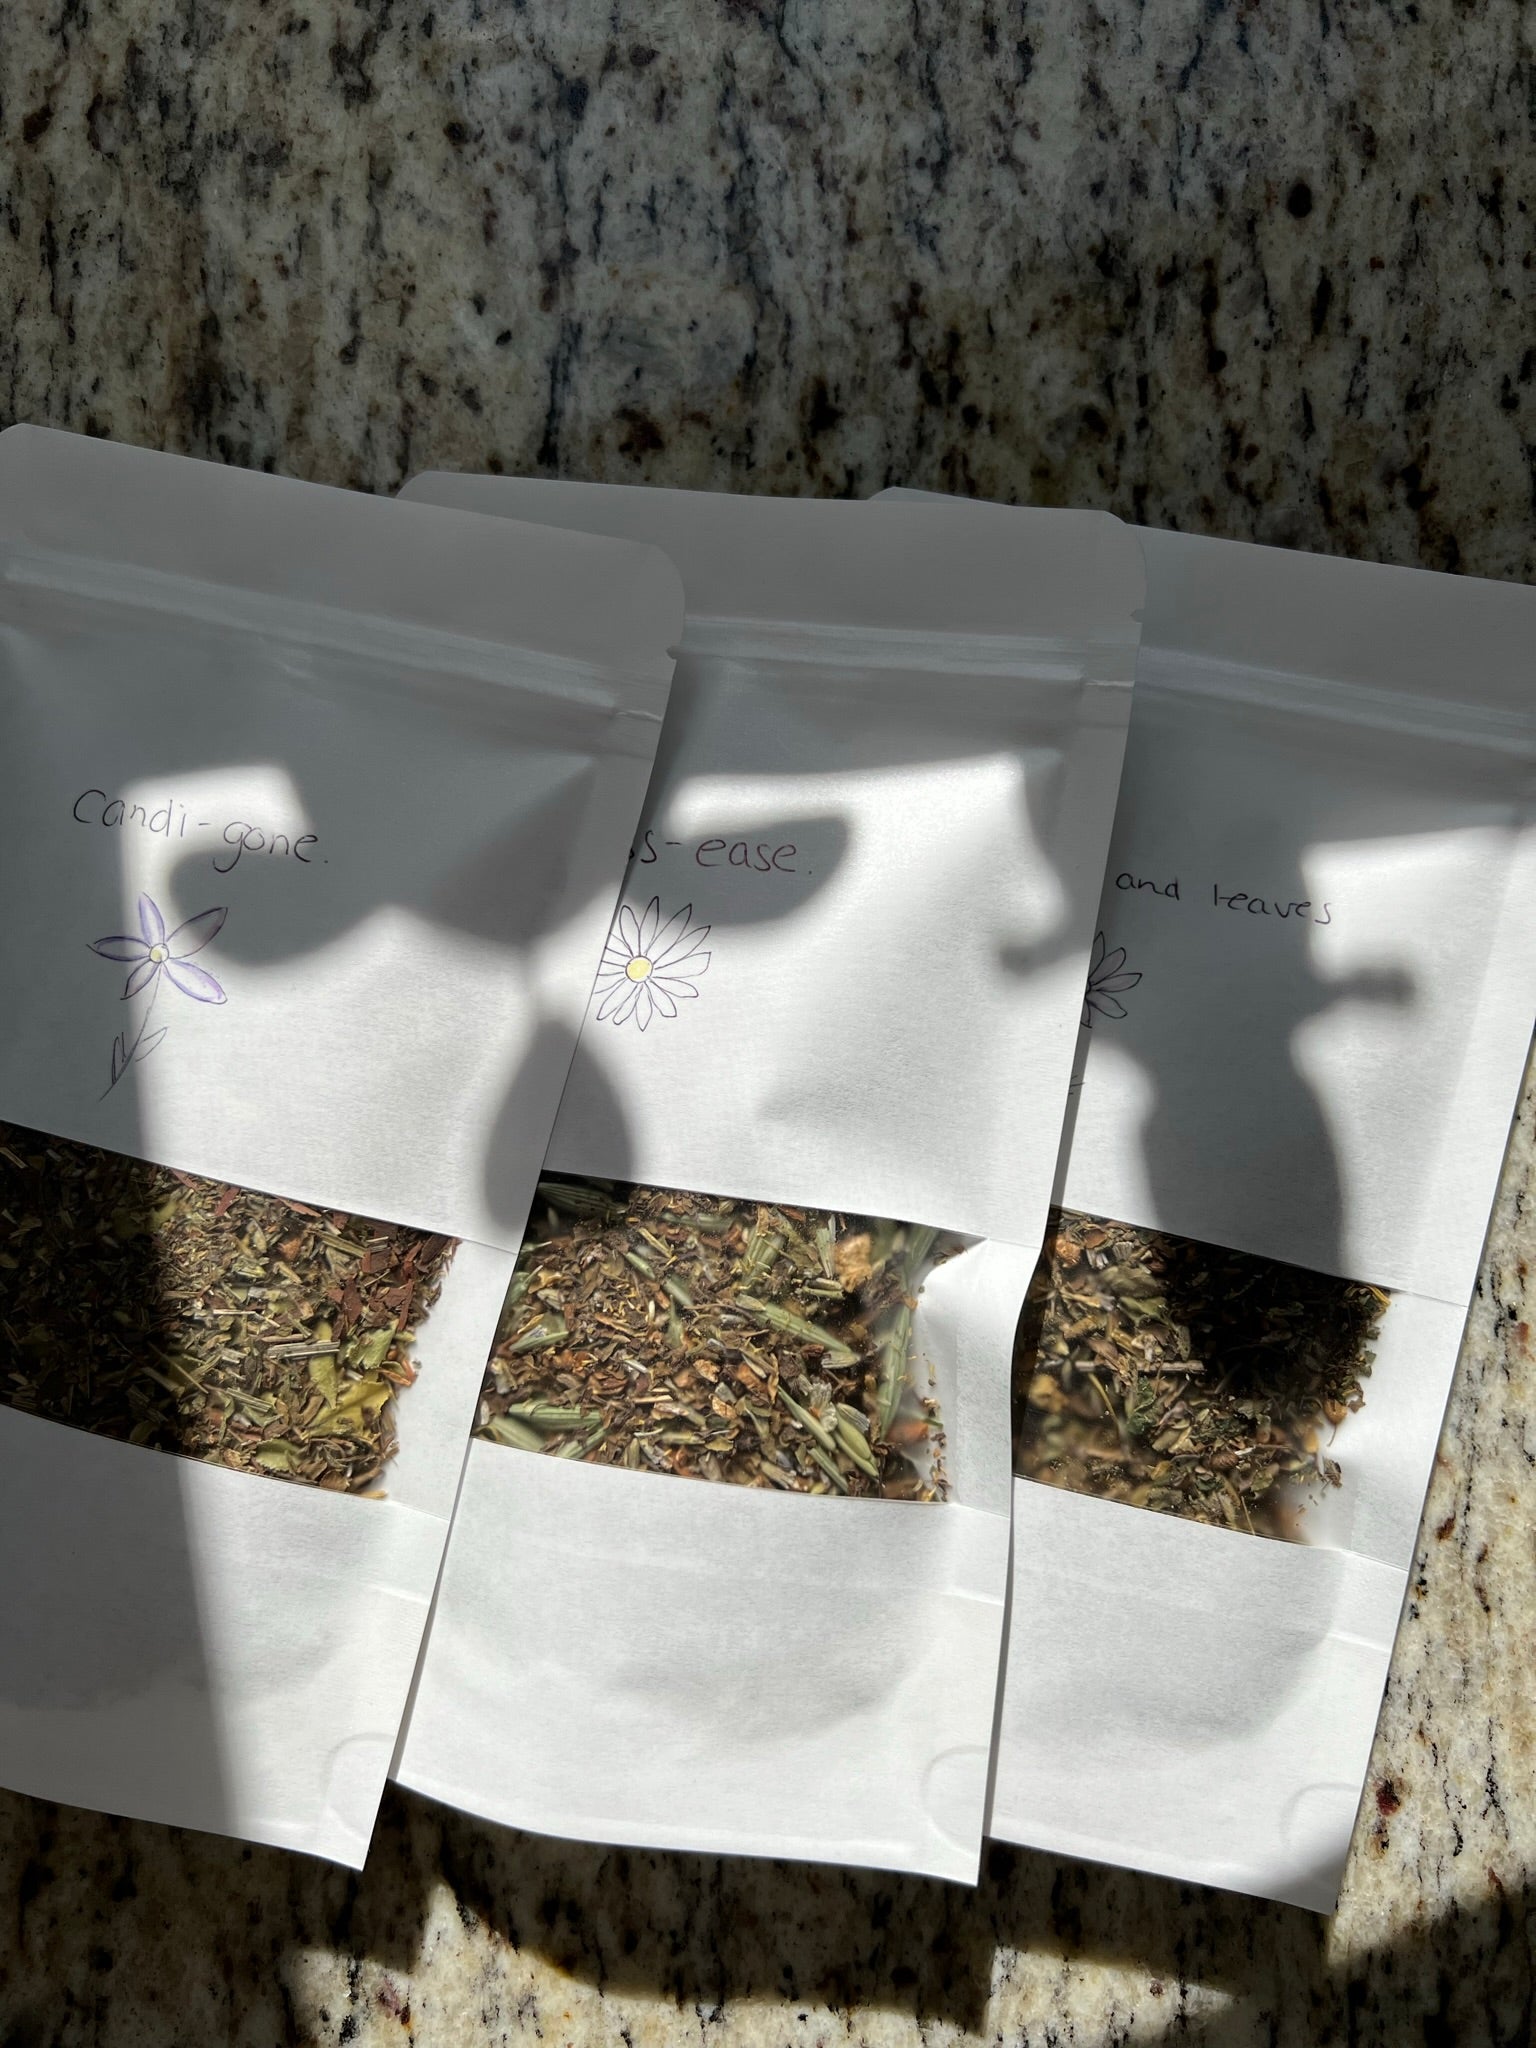 Tea pouches laying on a counter in sunlight